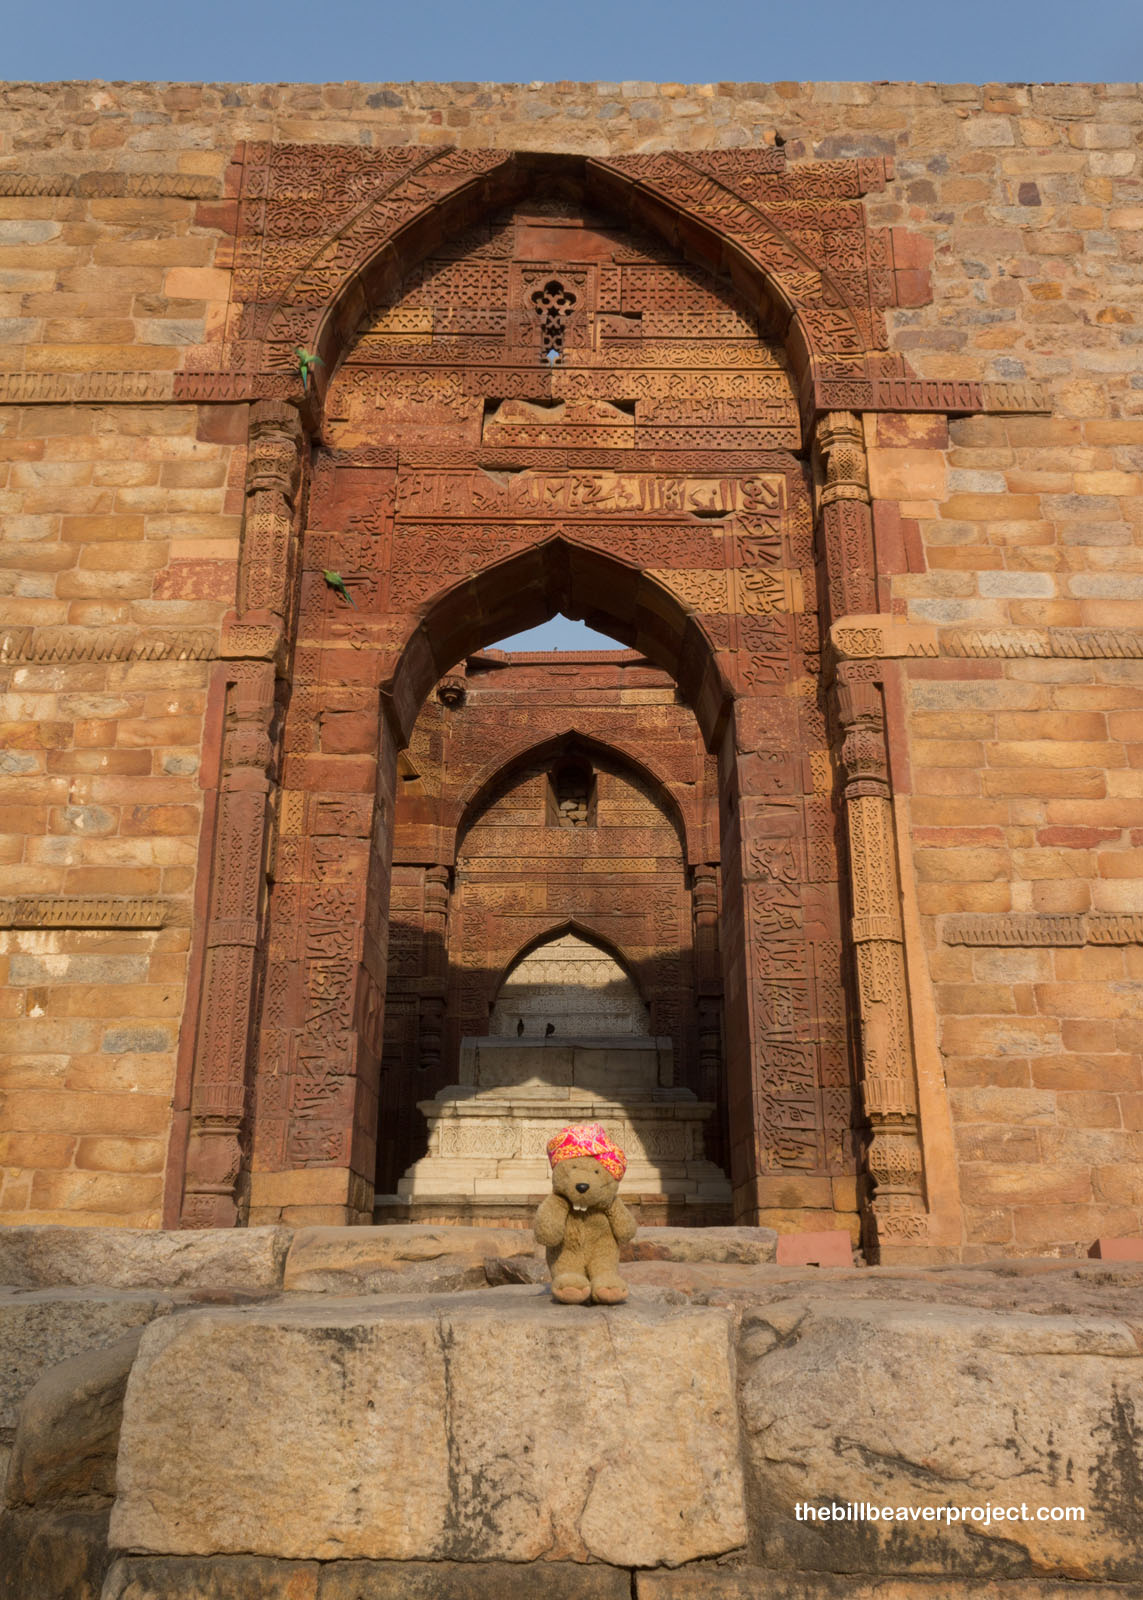 The entrance to Iltutmish's tomb!